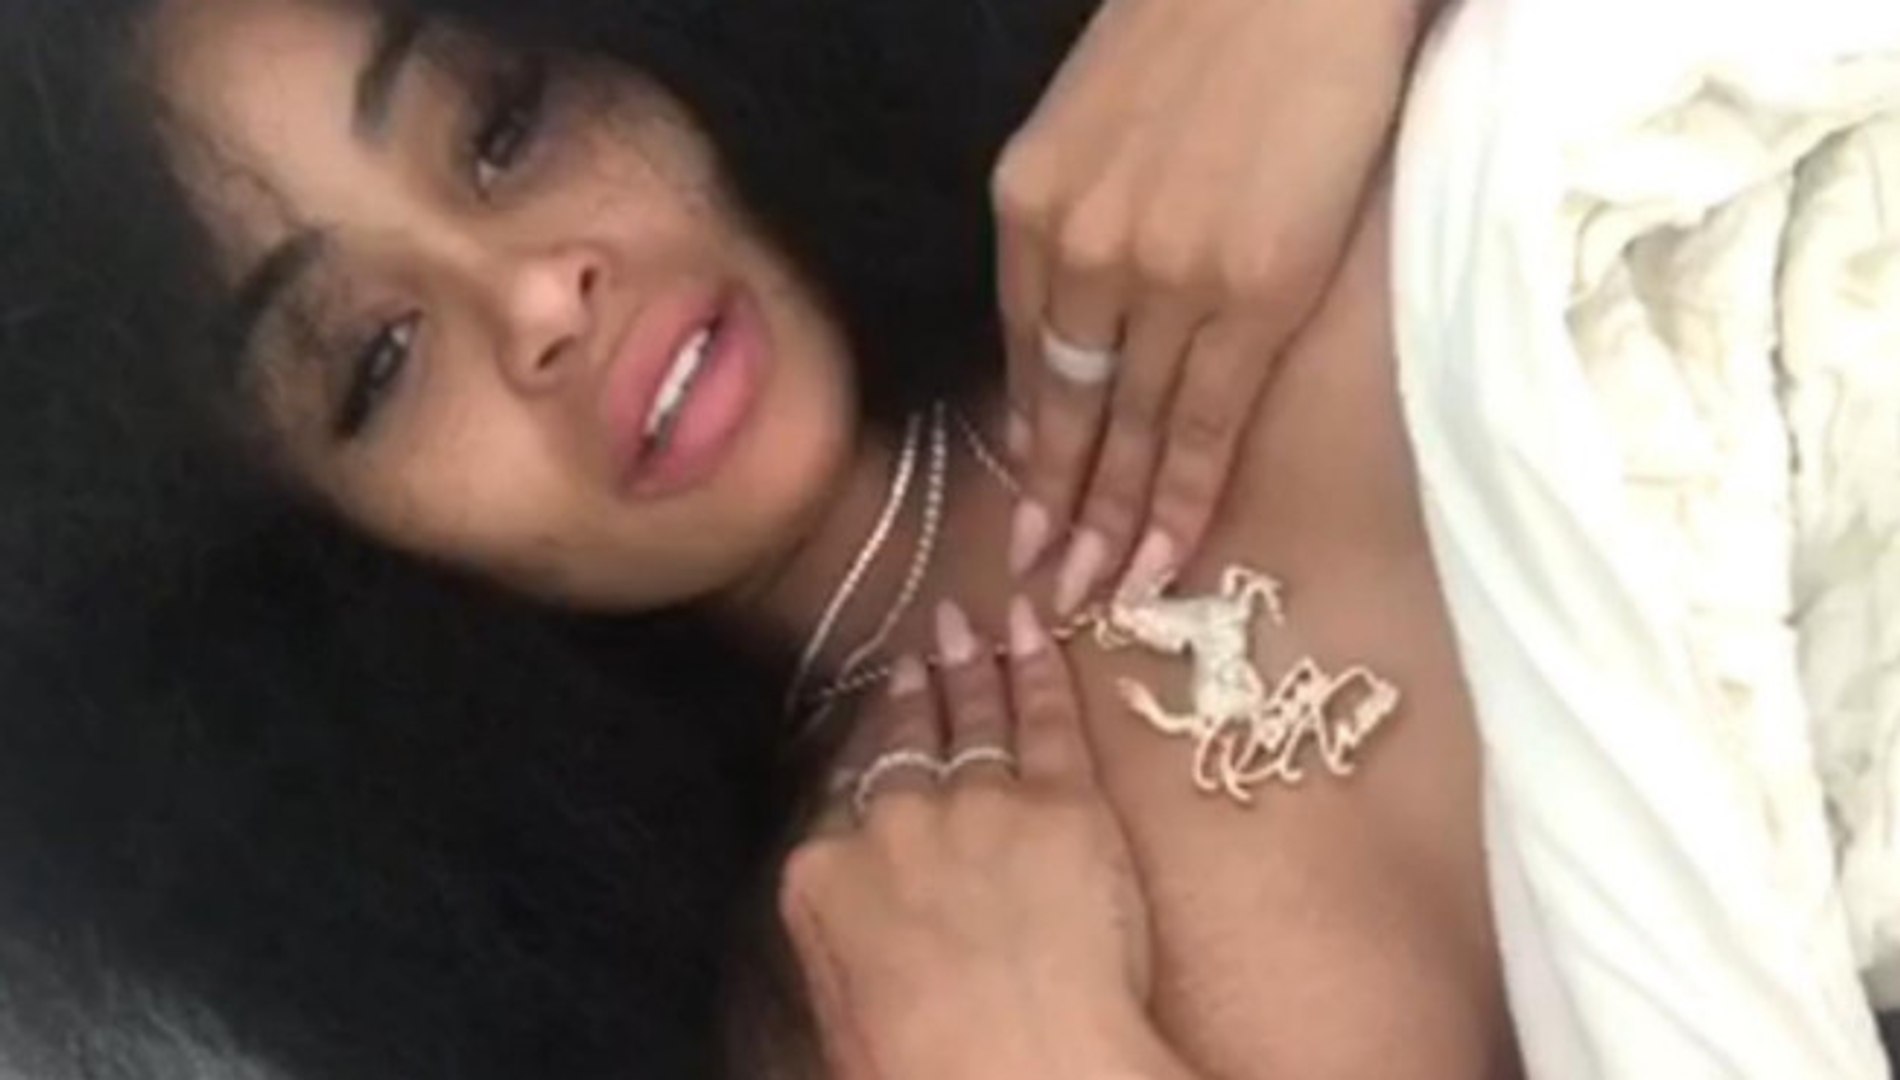 Blac Chyna Naked In Bed After Rob Kardashian Feud - video Dailymotion